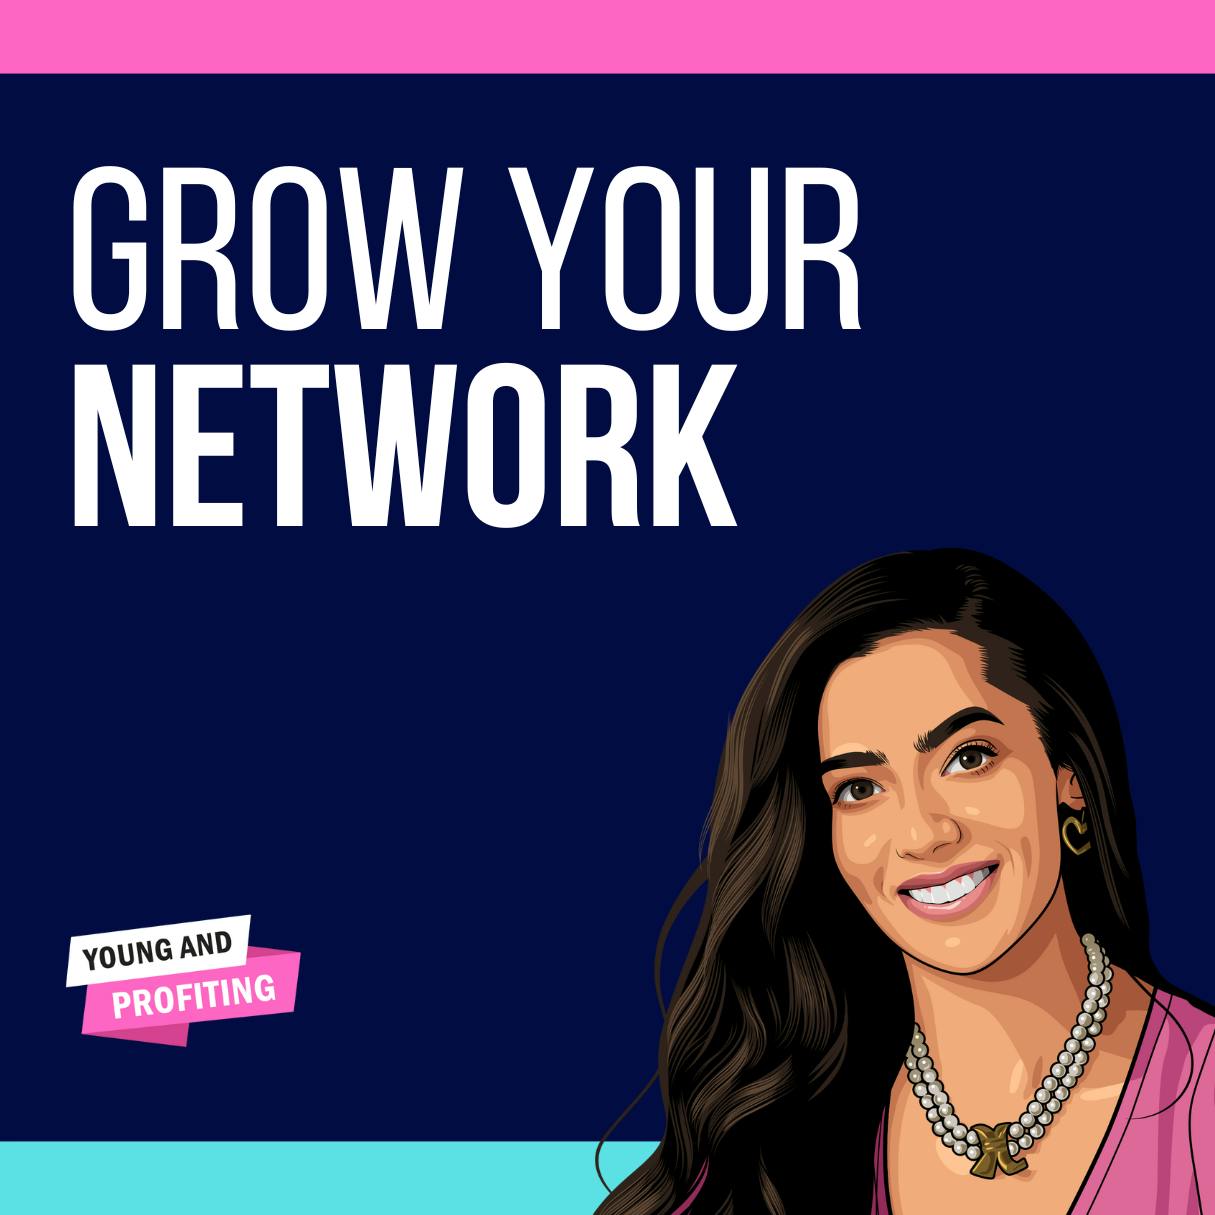 Hala Taha: Growing Your Network, Building Your Personal Brand, and Going Viral on LinkedIn